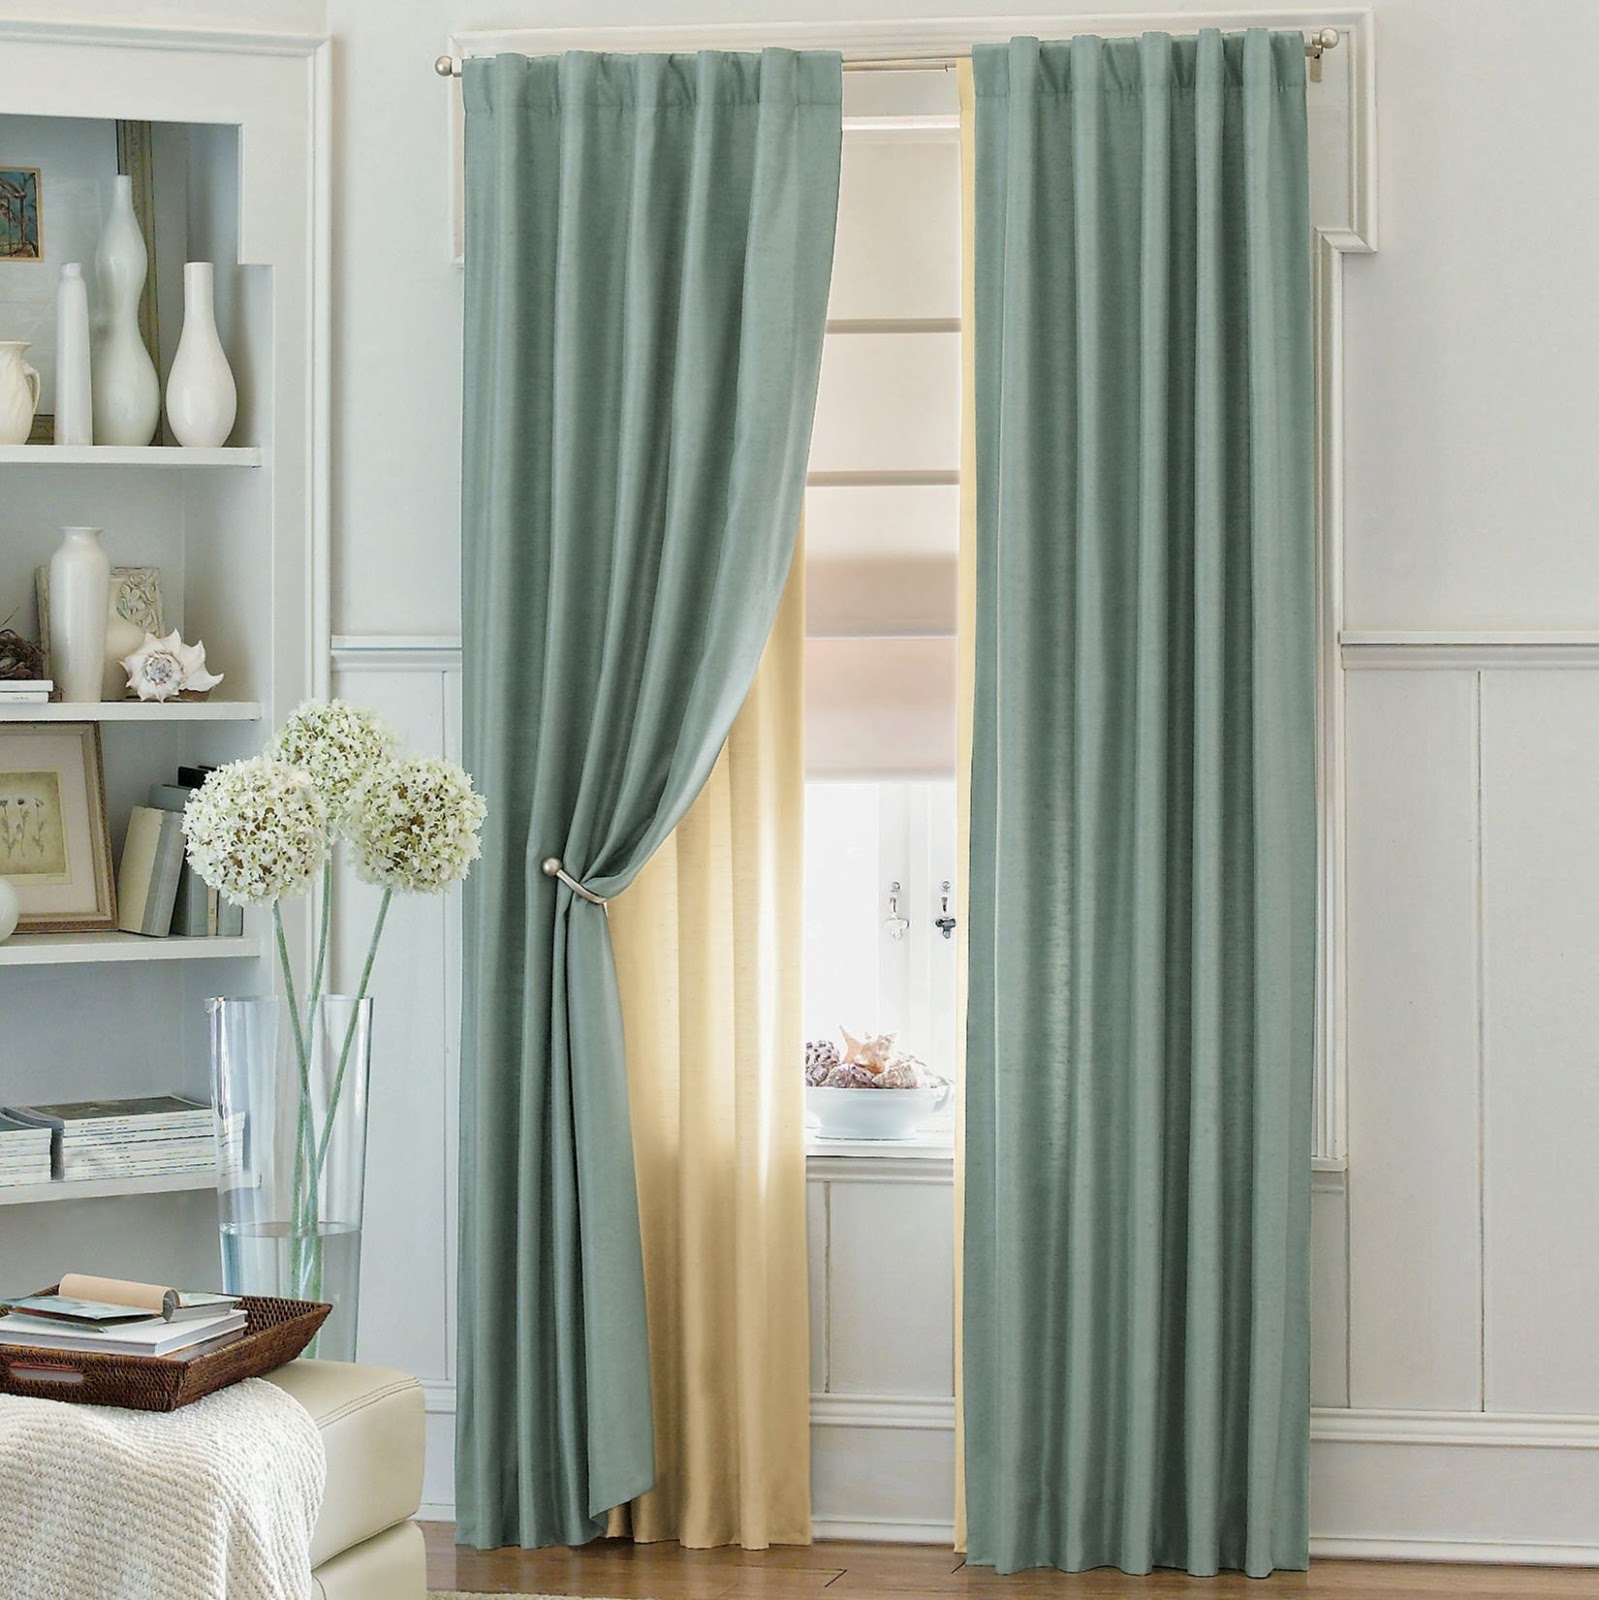 Can Curtains Reduce Noise Black Curtains